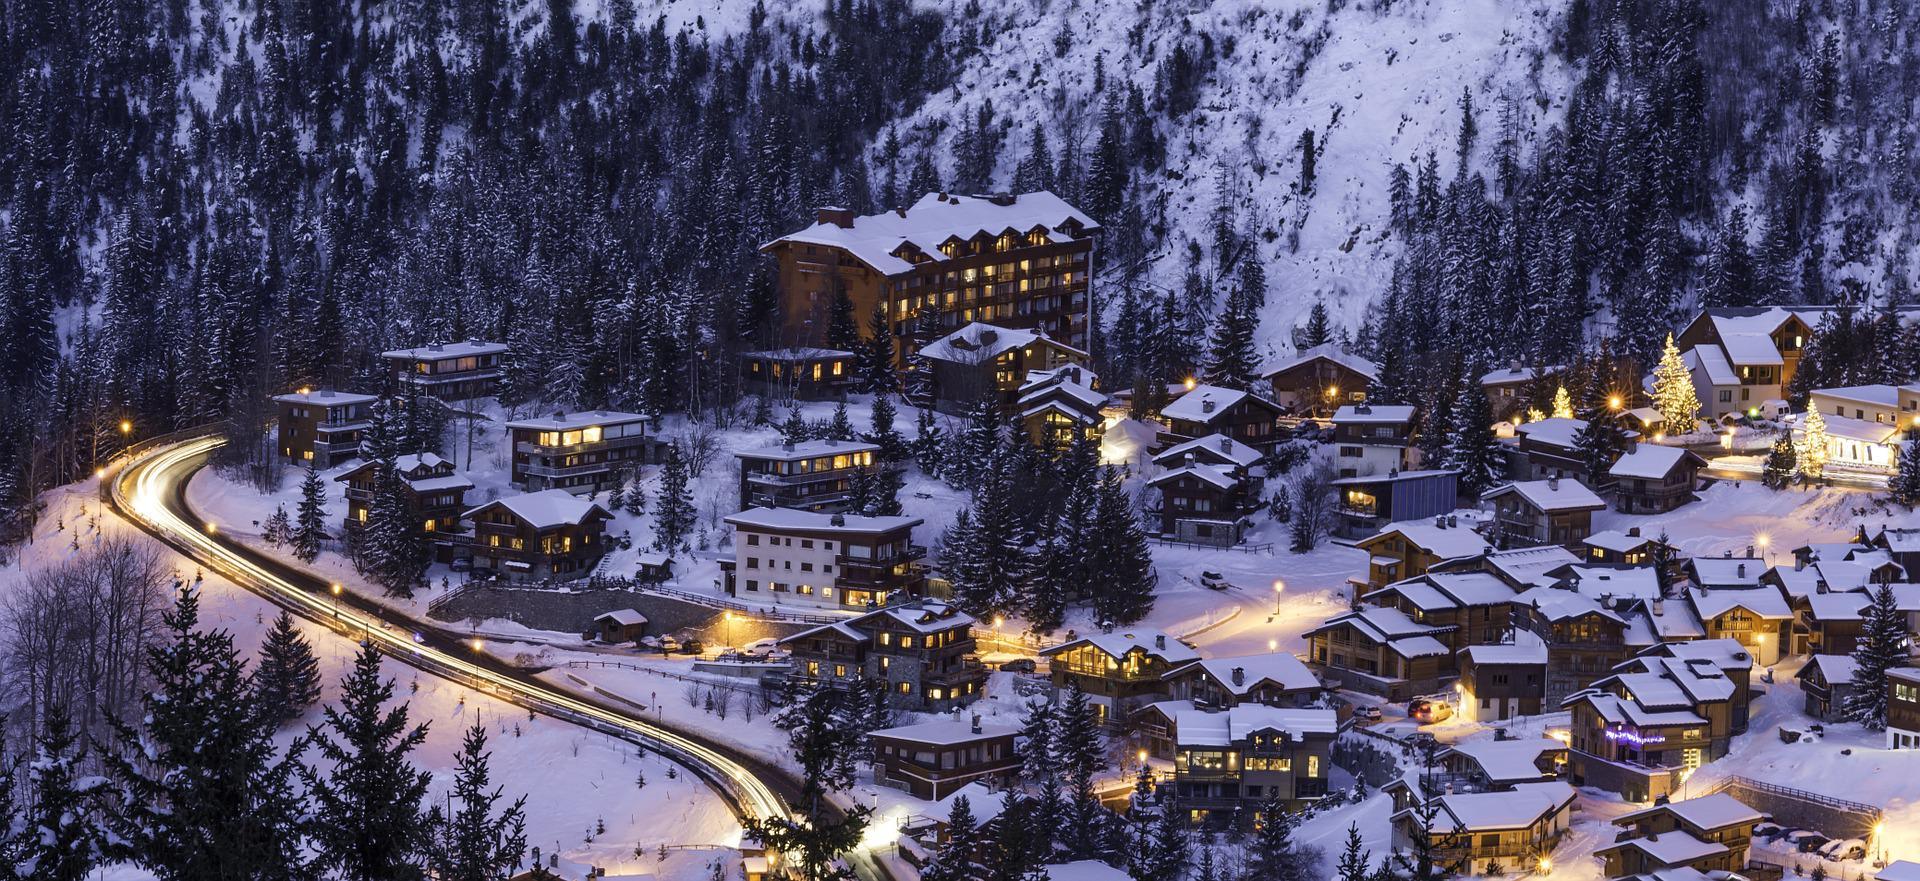 Courchevel road at night